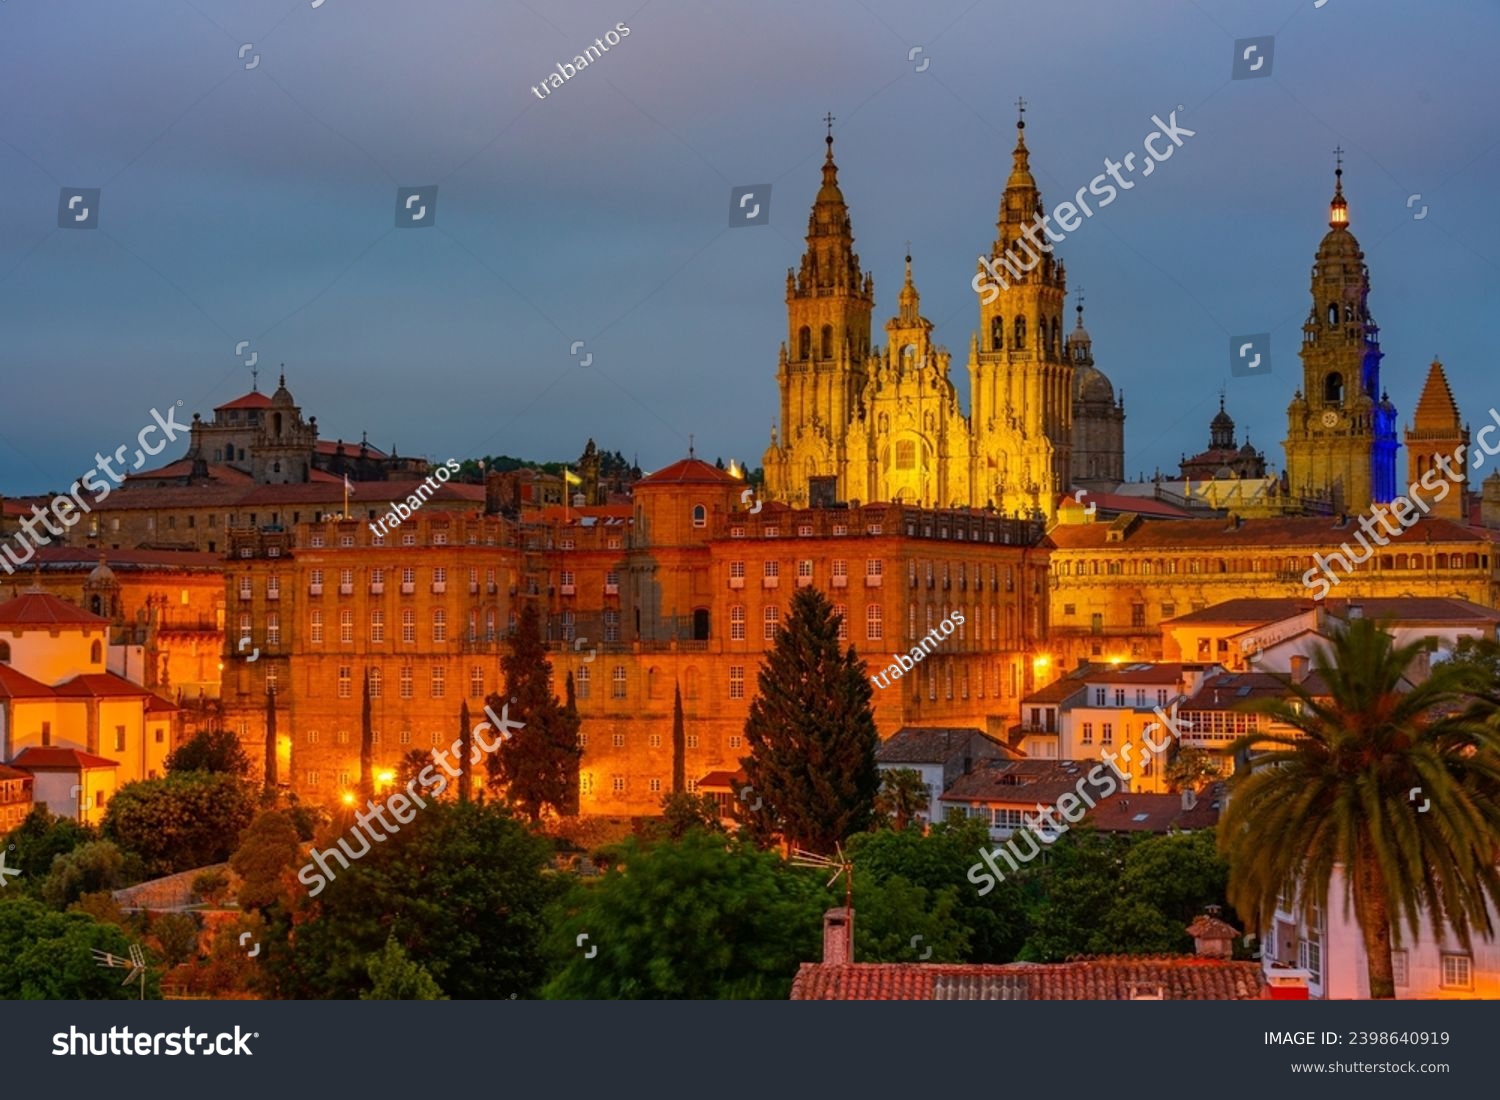 Night panorama view of the Cathedral of Santiago de Compostela in Spain. #2398640919